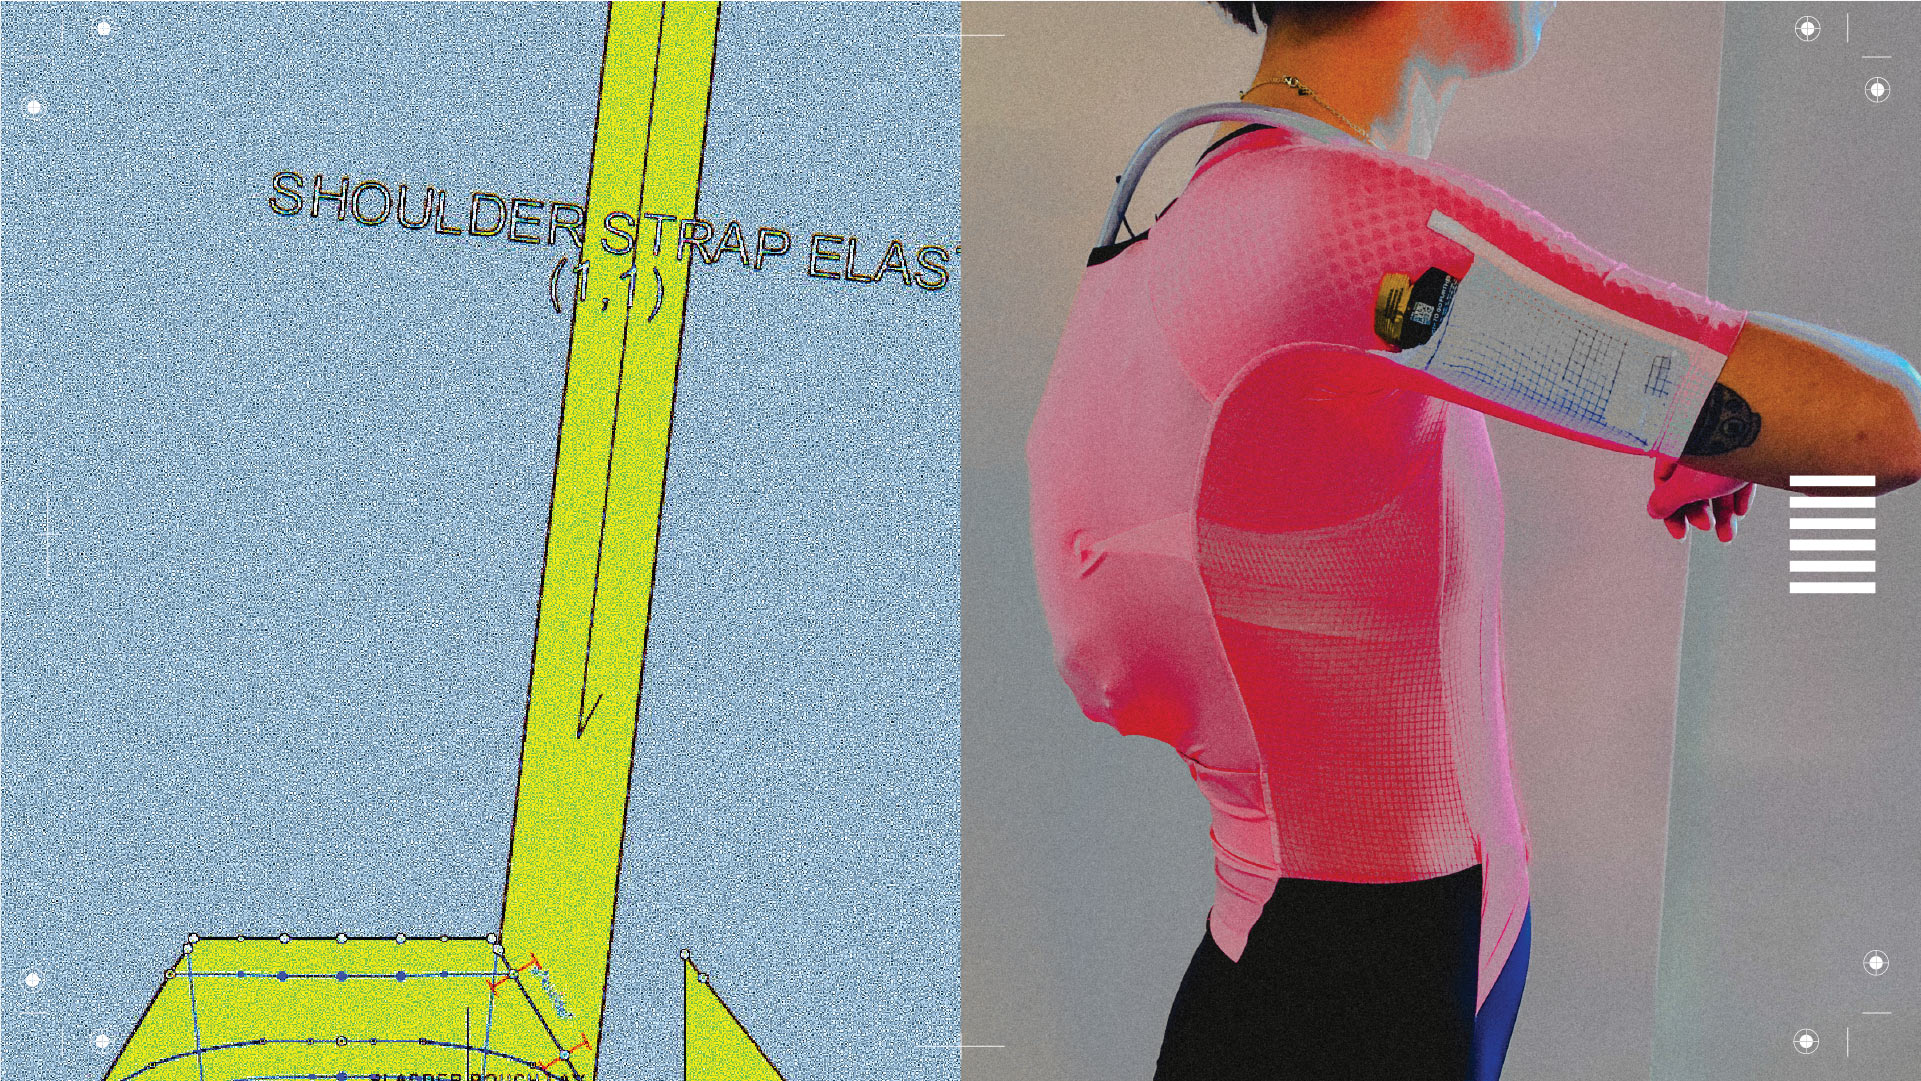 rapha project blaero gravel skinsuit with hydration bladder shown on a rider